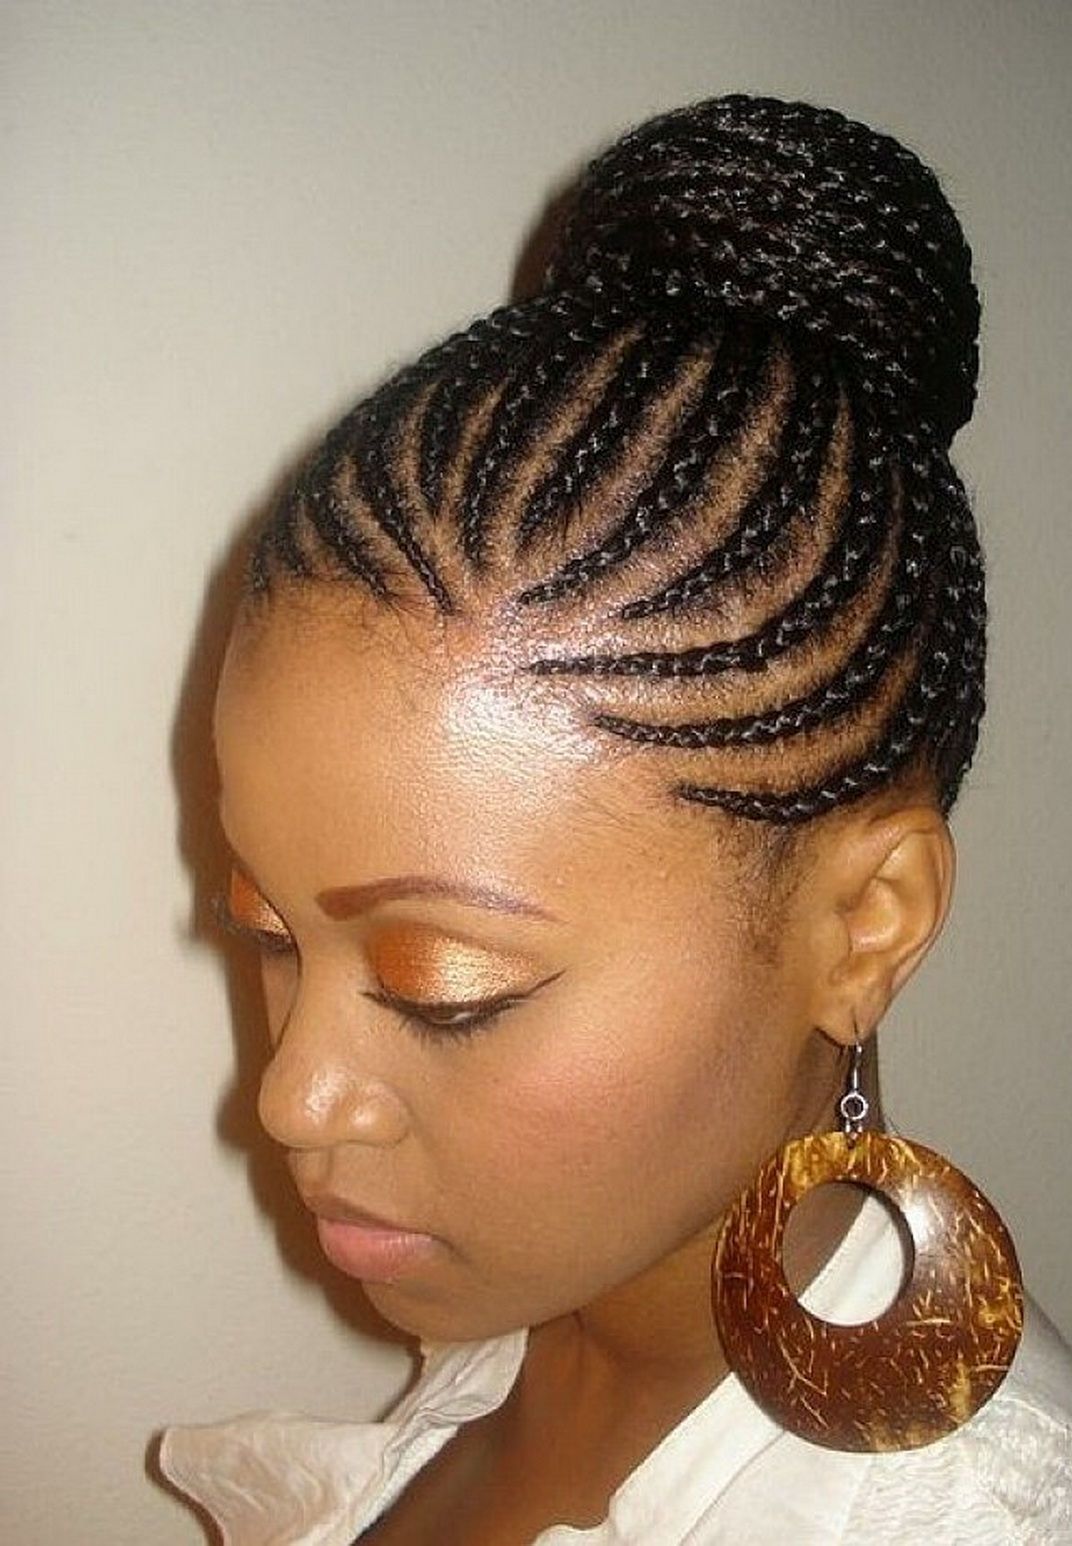 Widely Used Black Updo Braided Hairstyles Regarding Black Ladies Hair Braid Style Black Updo Braids Hairstyles Black (View 8 of 15)